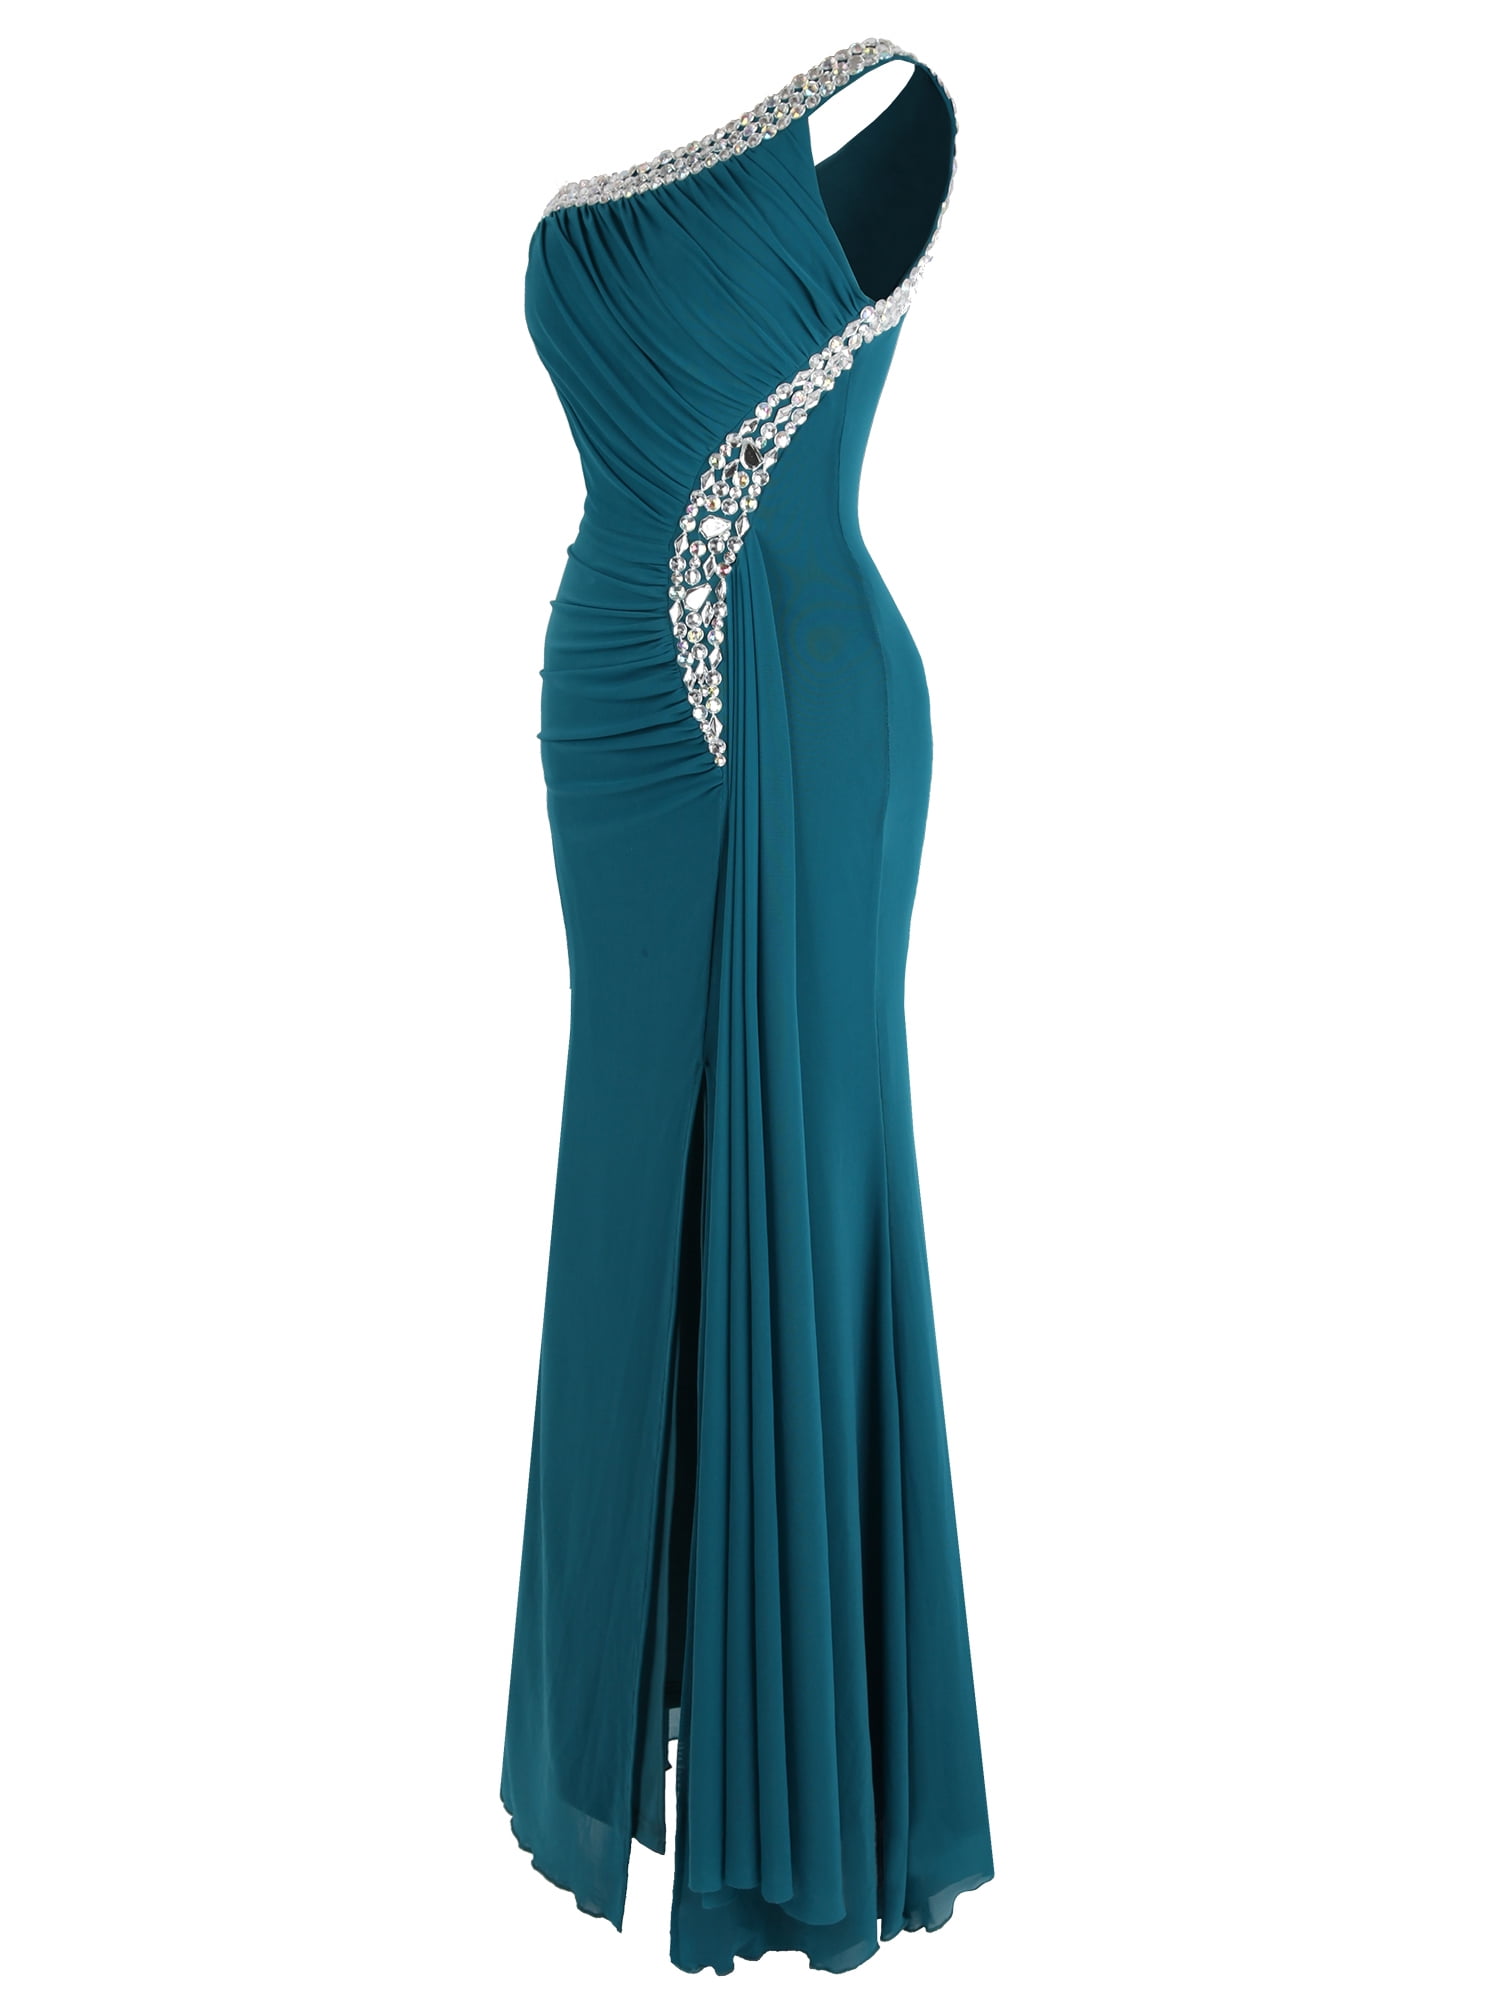 Angel-fashions Women's One Shoulder Ruching Beading Ribbon Soft Evening Gown